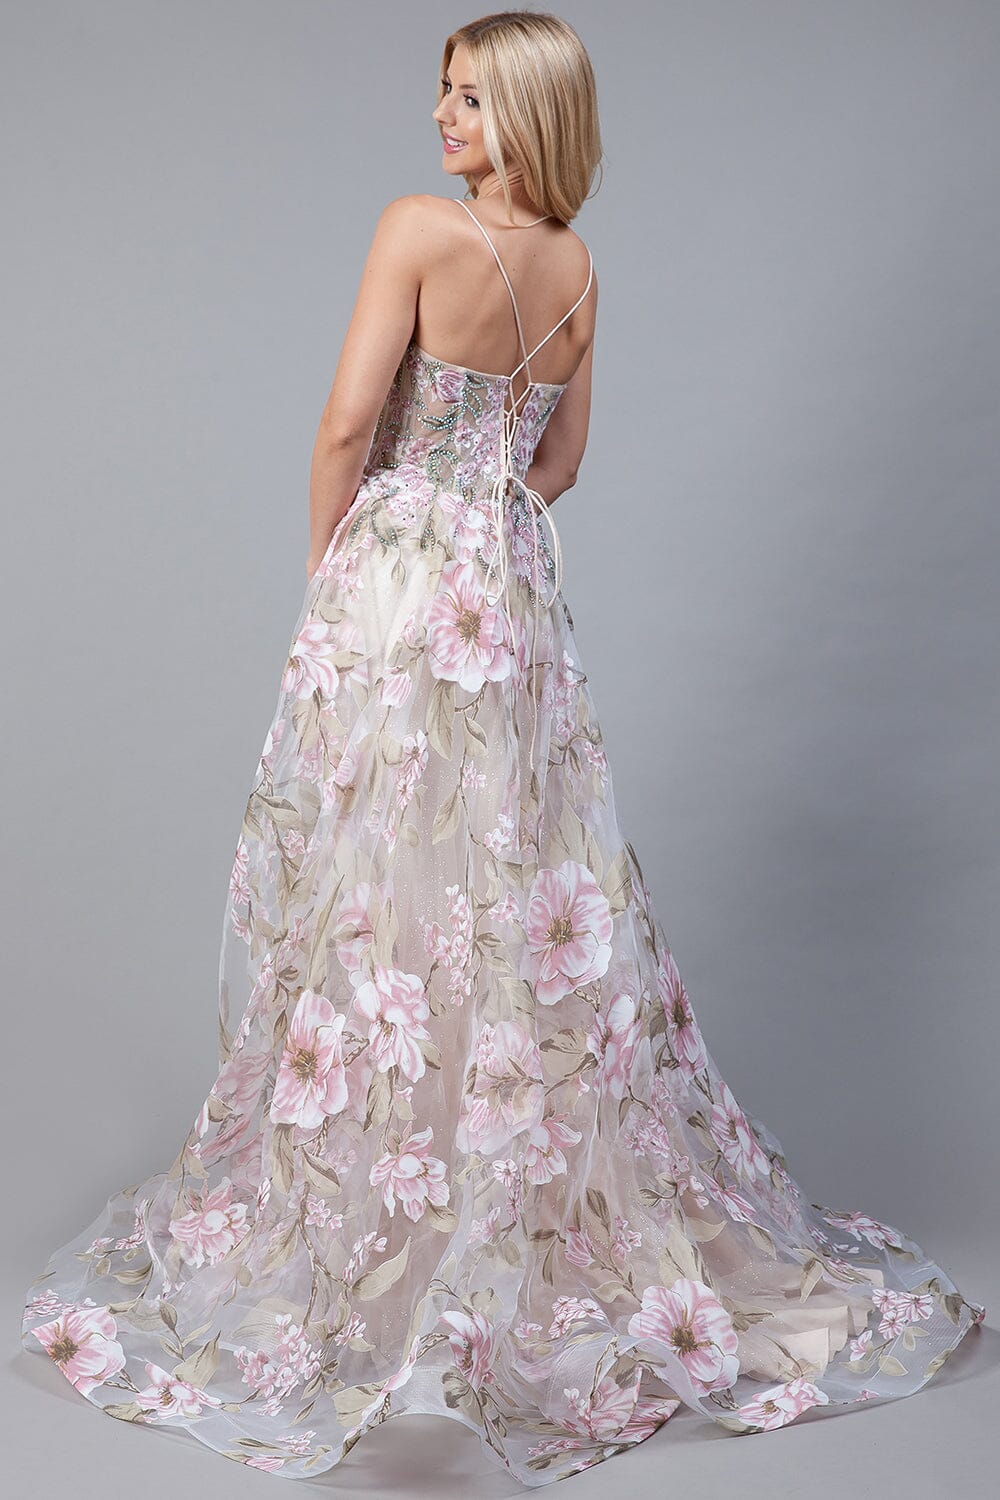 Floral Print Sleeveless Slit Gown by Amelia Couture 2105